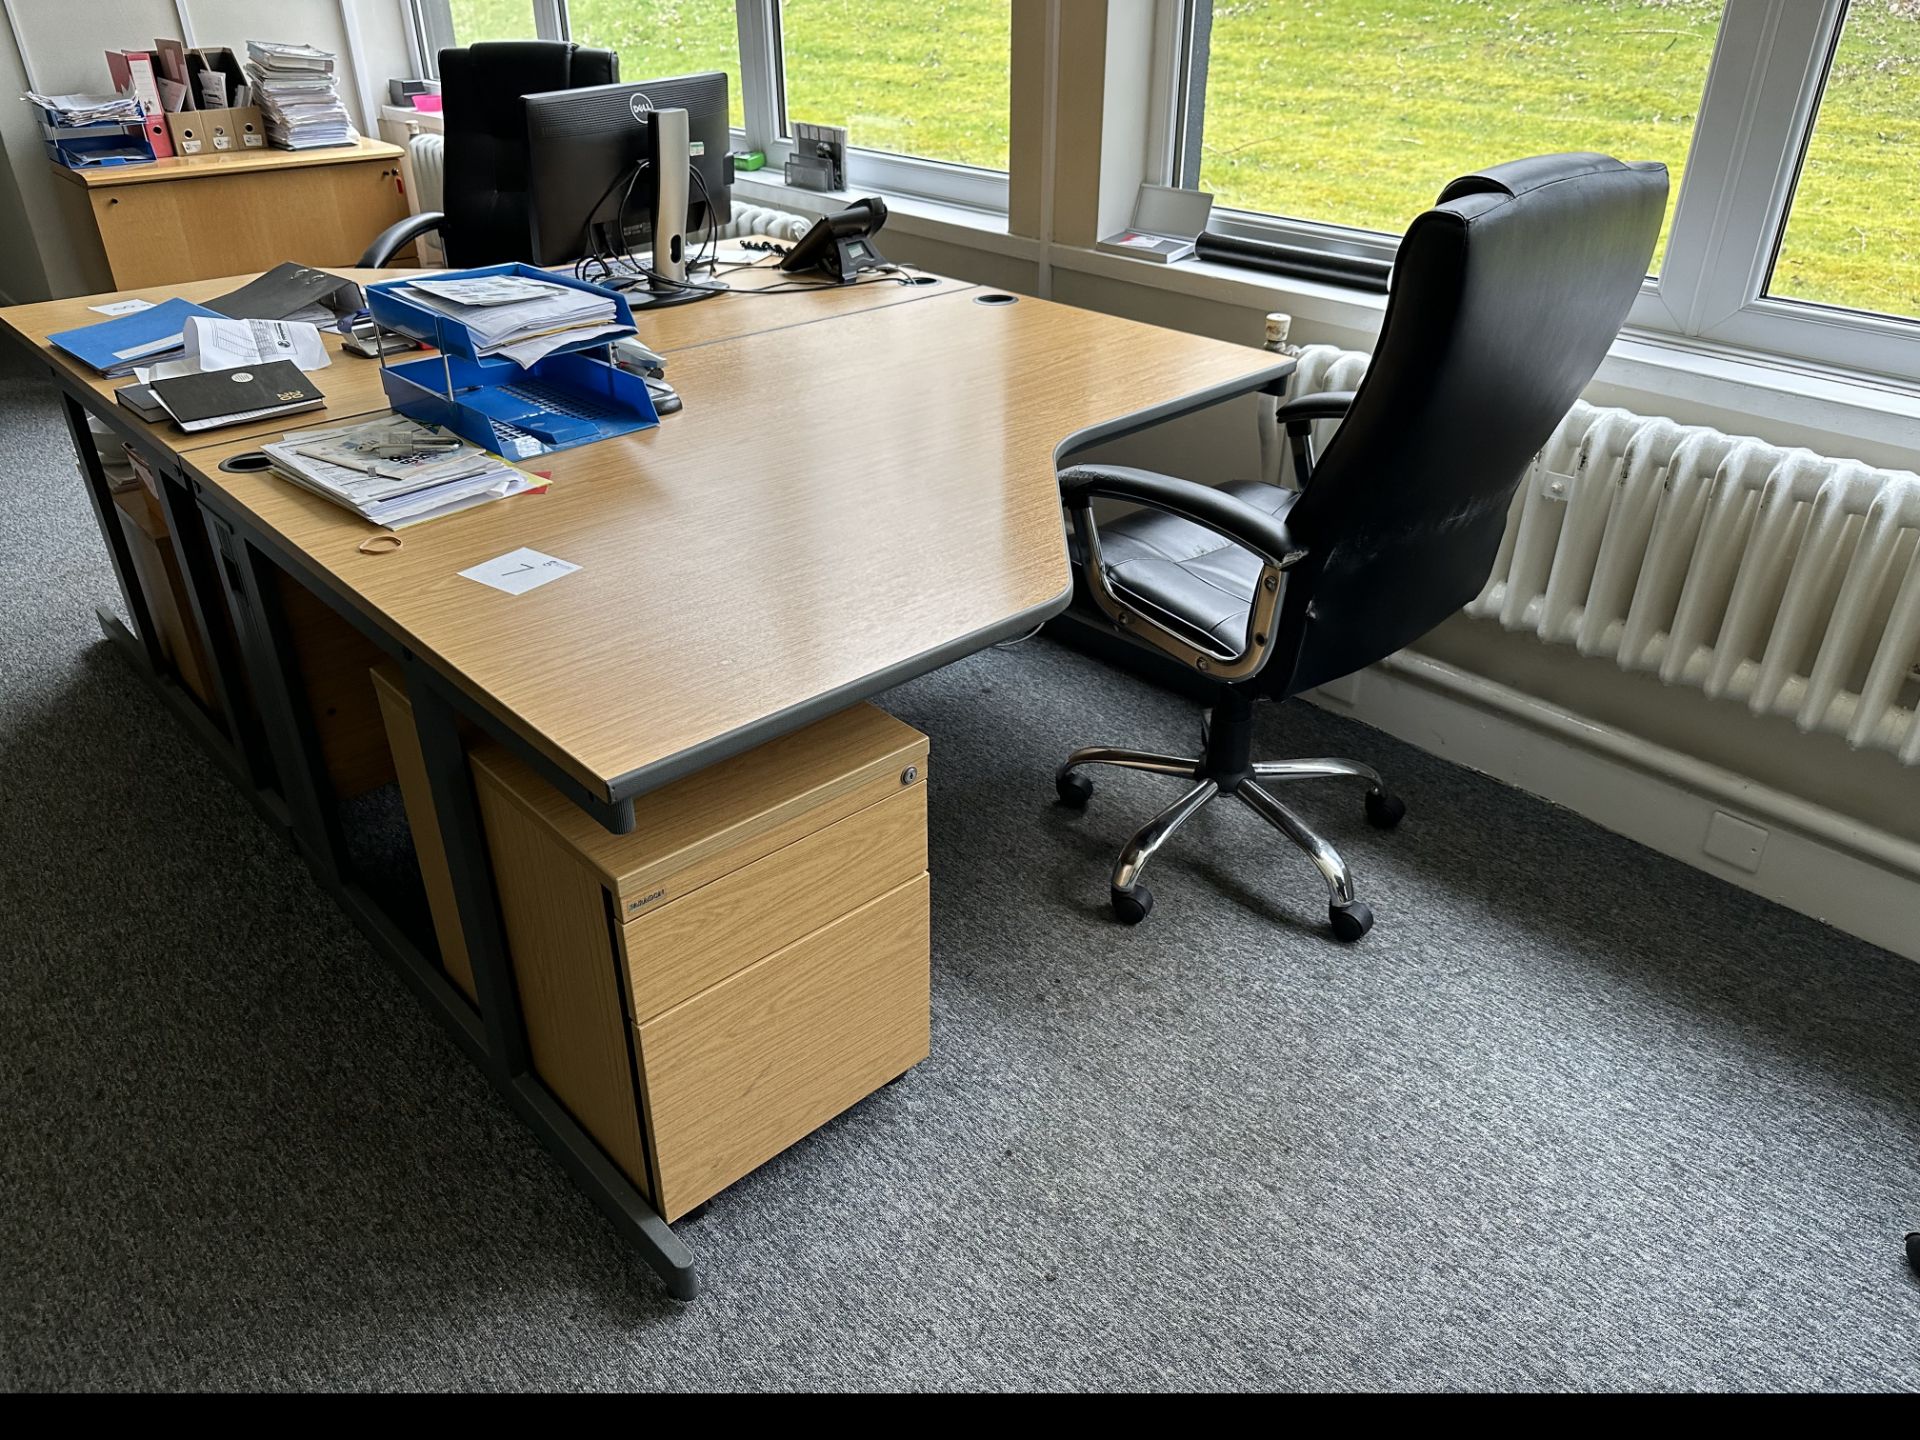 OFFICE SUITE - MONITOR, DESK CHAIR, CABINET & DRAWERS